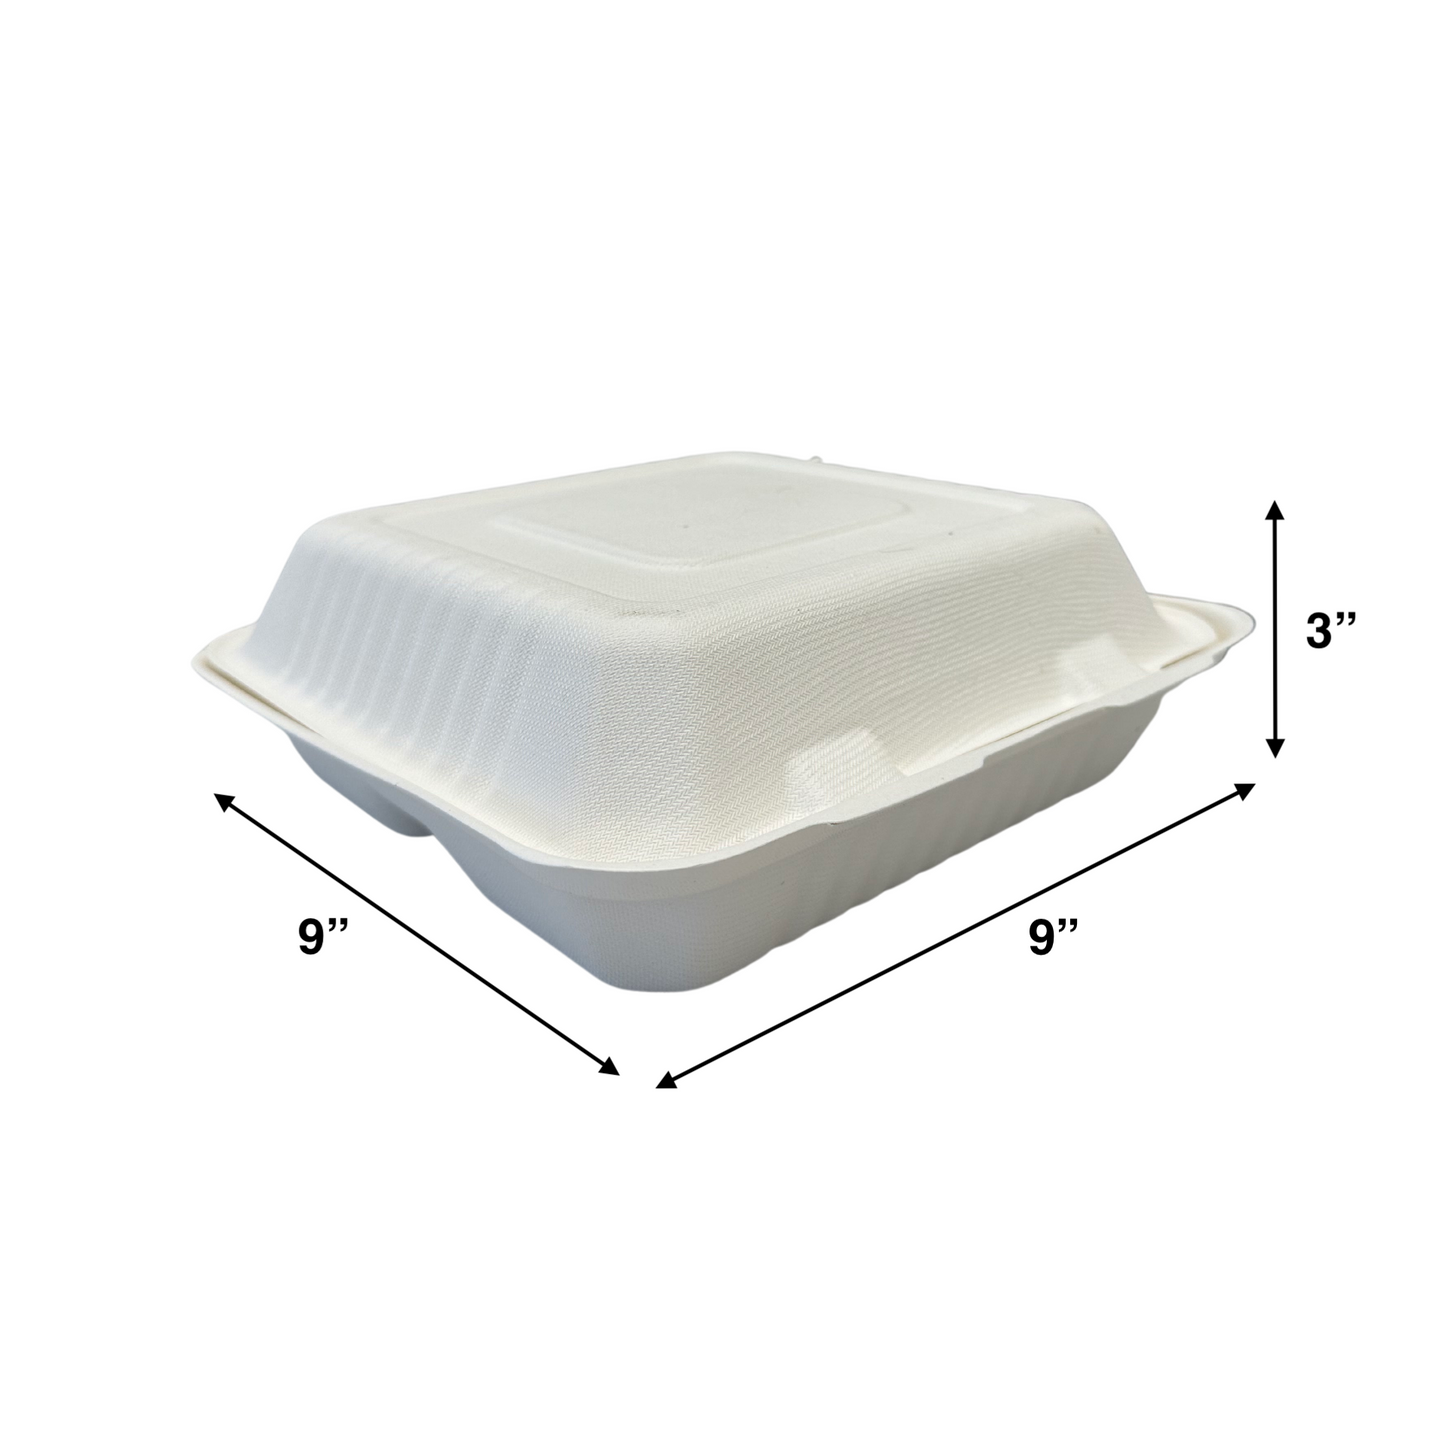 KIS-S9933 | 9x9x3 inches, 3-Compartment, Sugarcane Clamshell Food Container; $0.230/pc